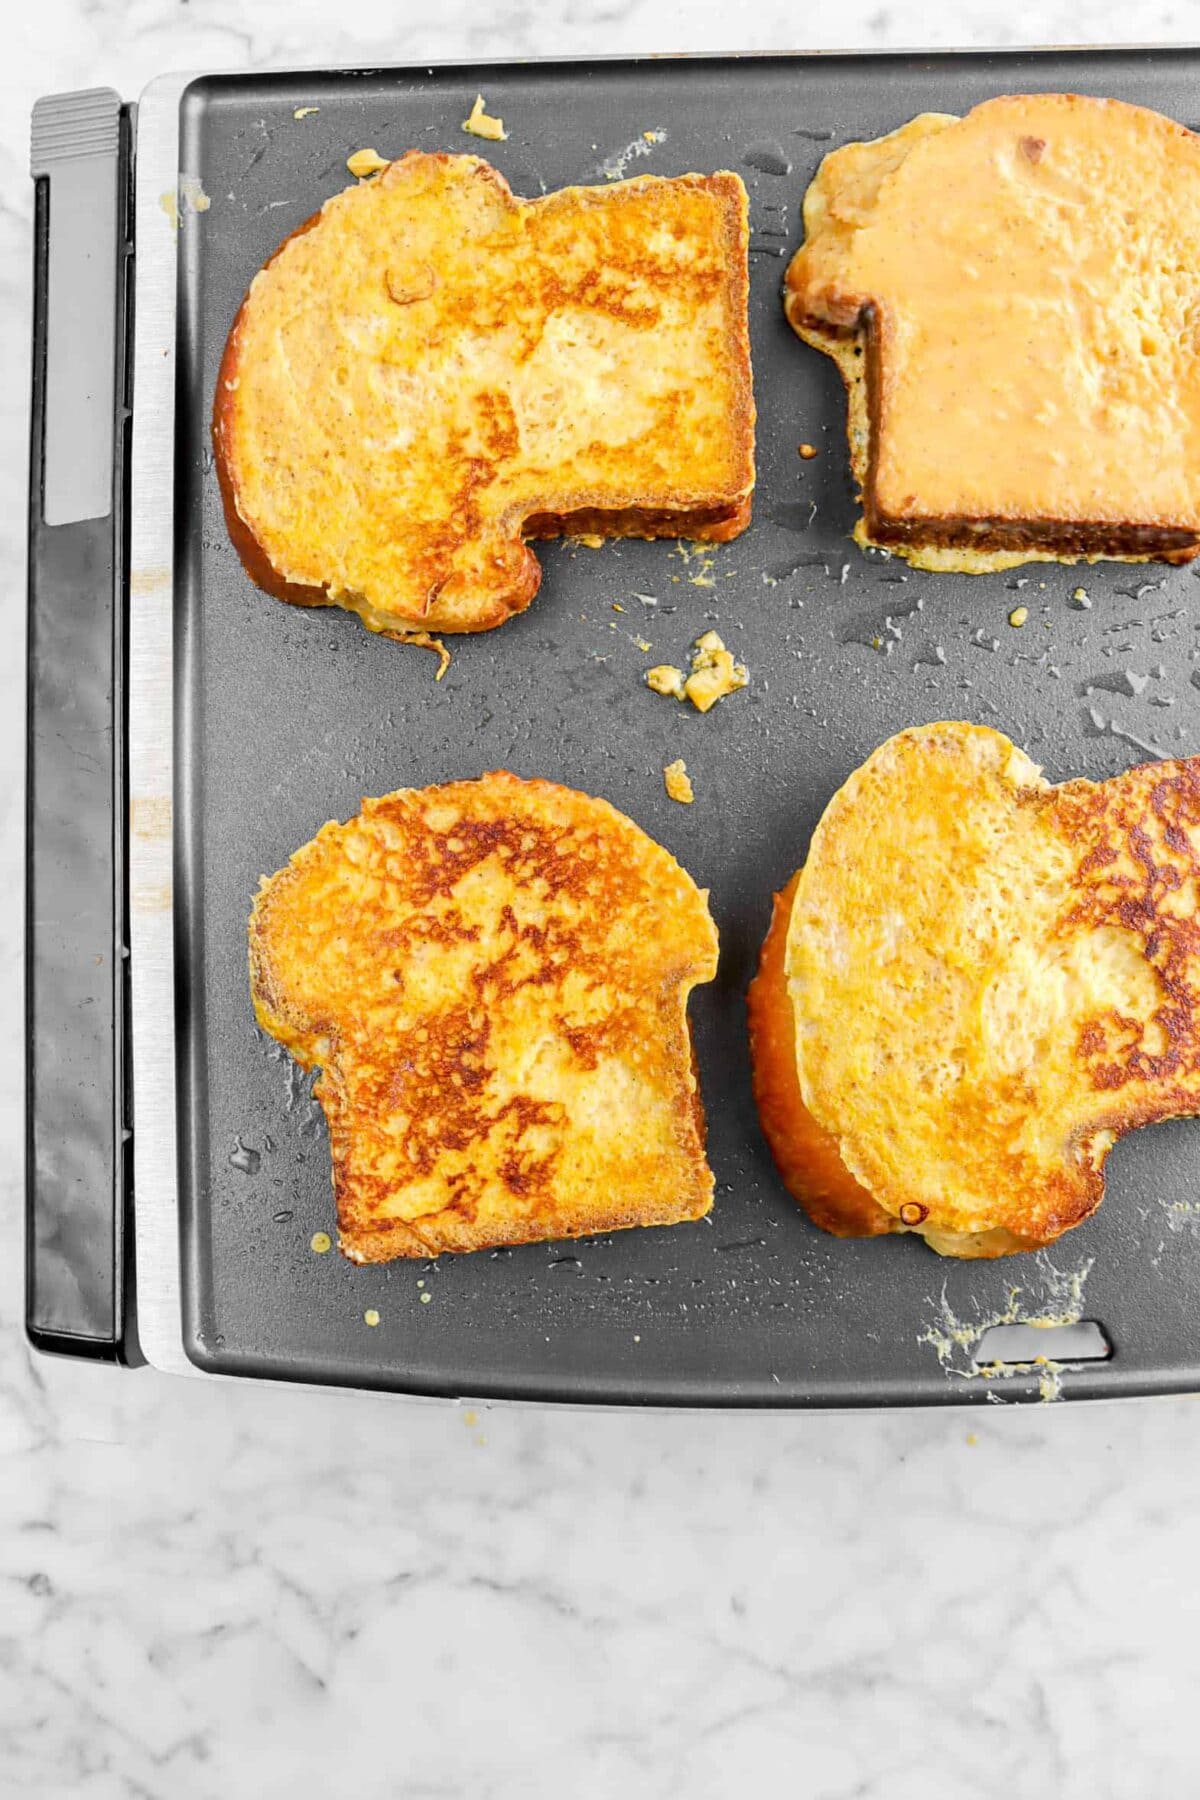 griddled french toast